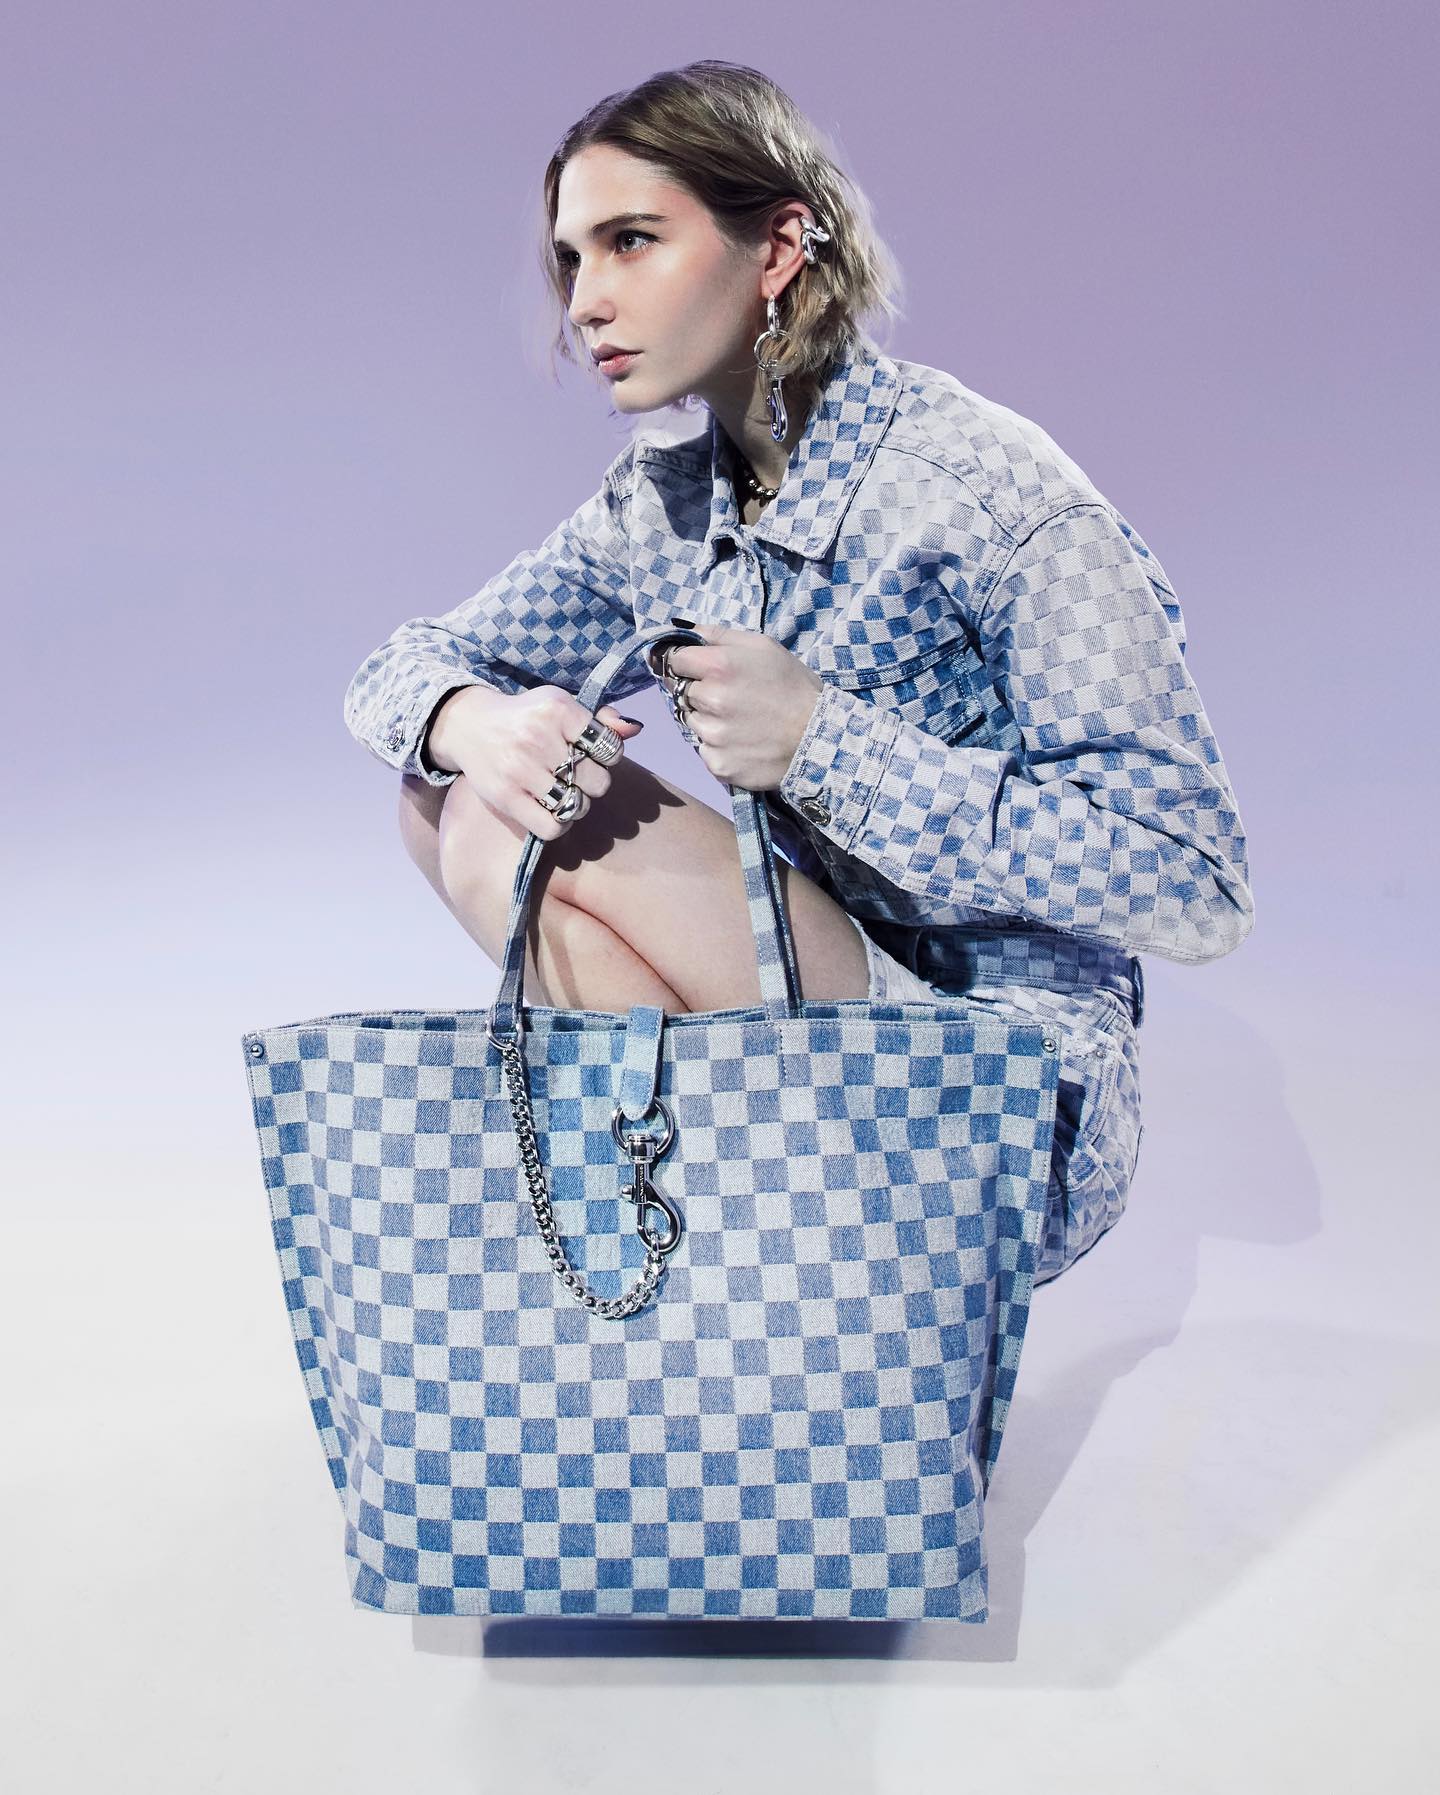 A woman bends at the knee while holding a blue checkered bag from Rebecca Minkoff. Her jacket matches the bag.